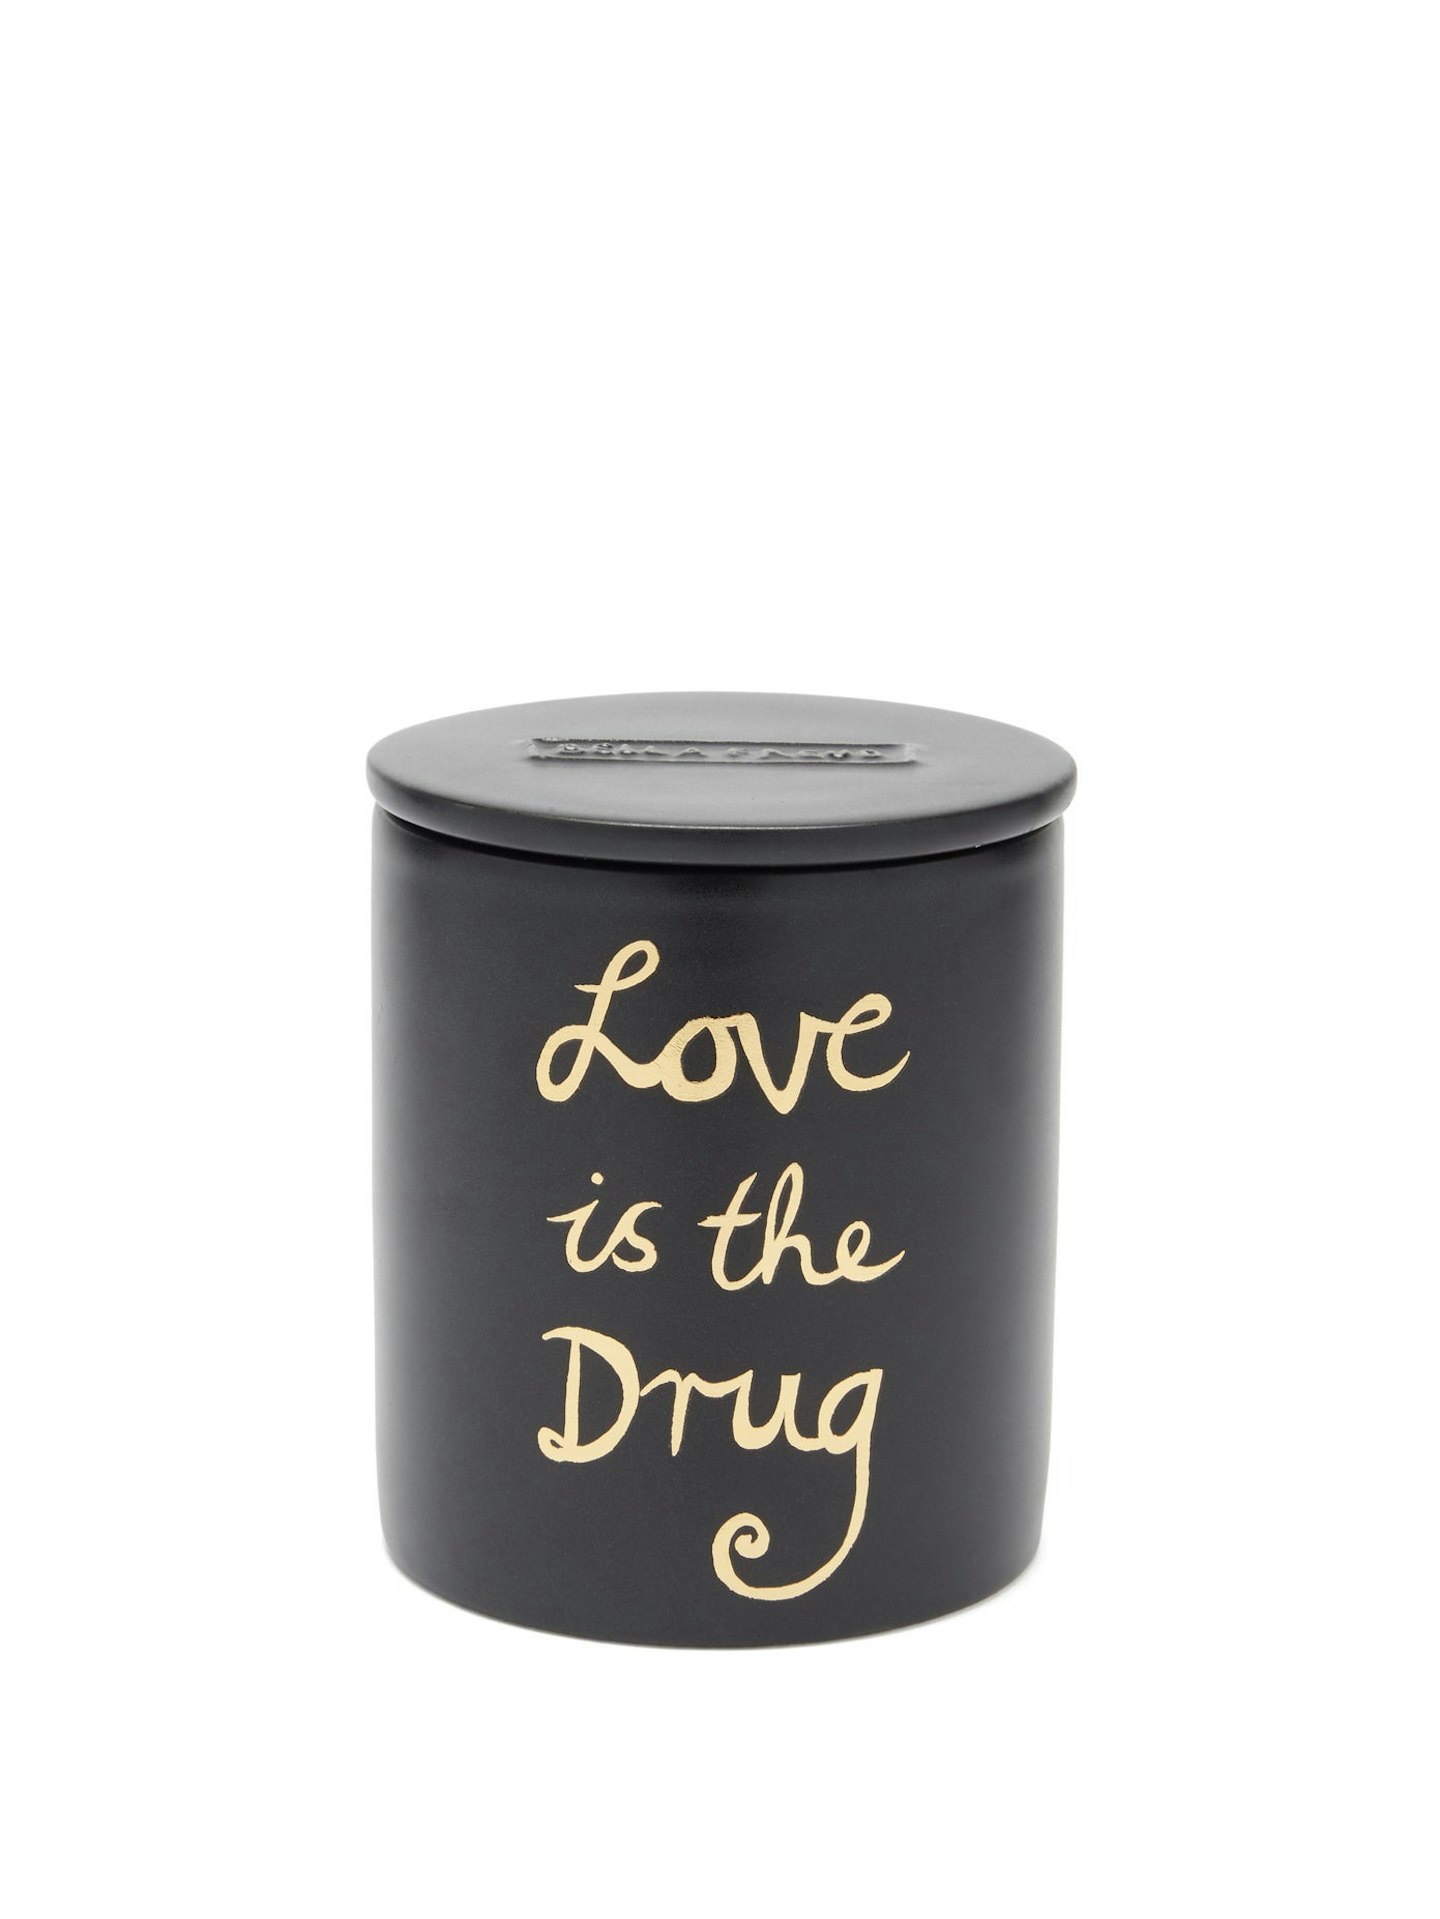 Bella Freud, Love is the Drug scented candle, £95